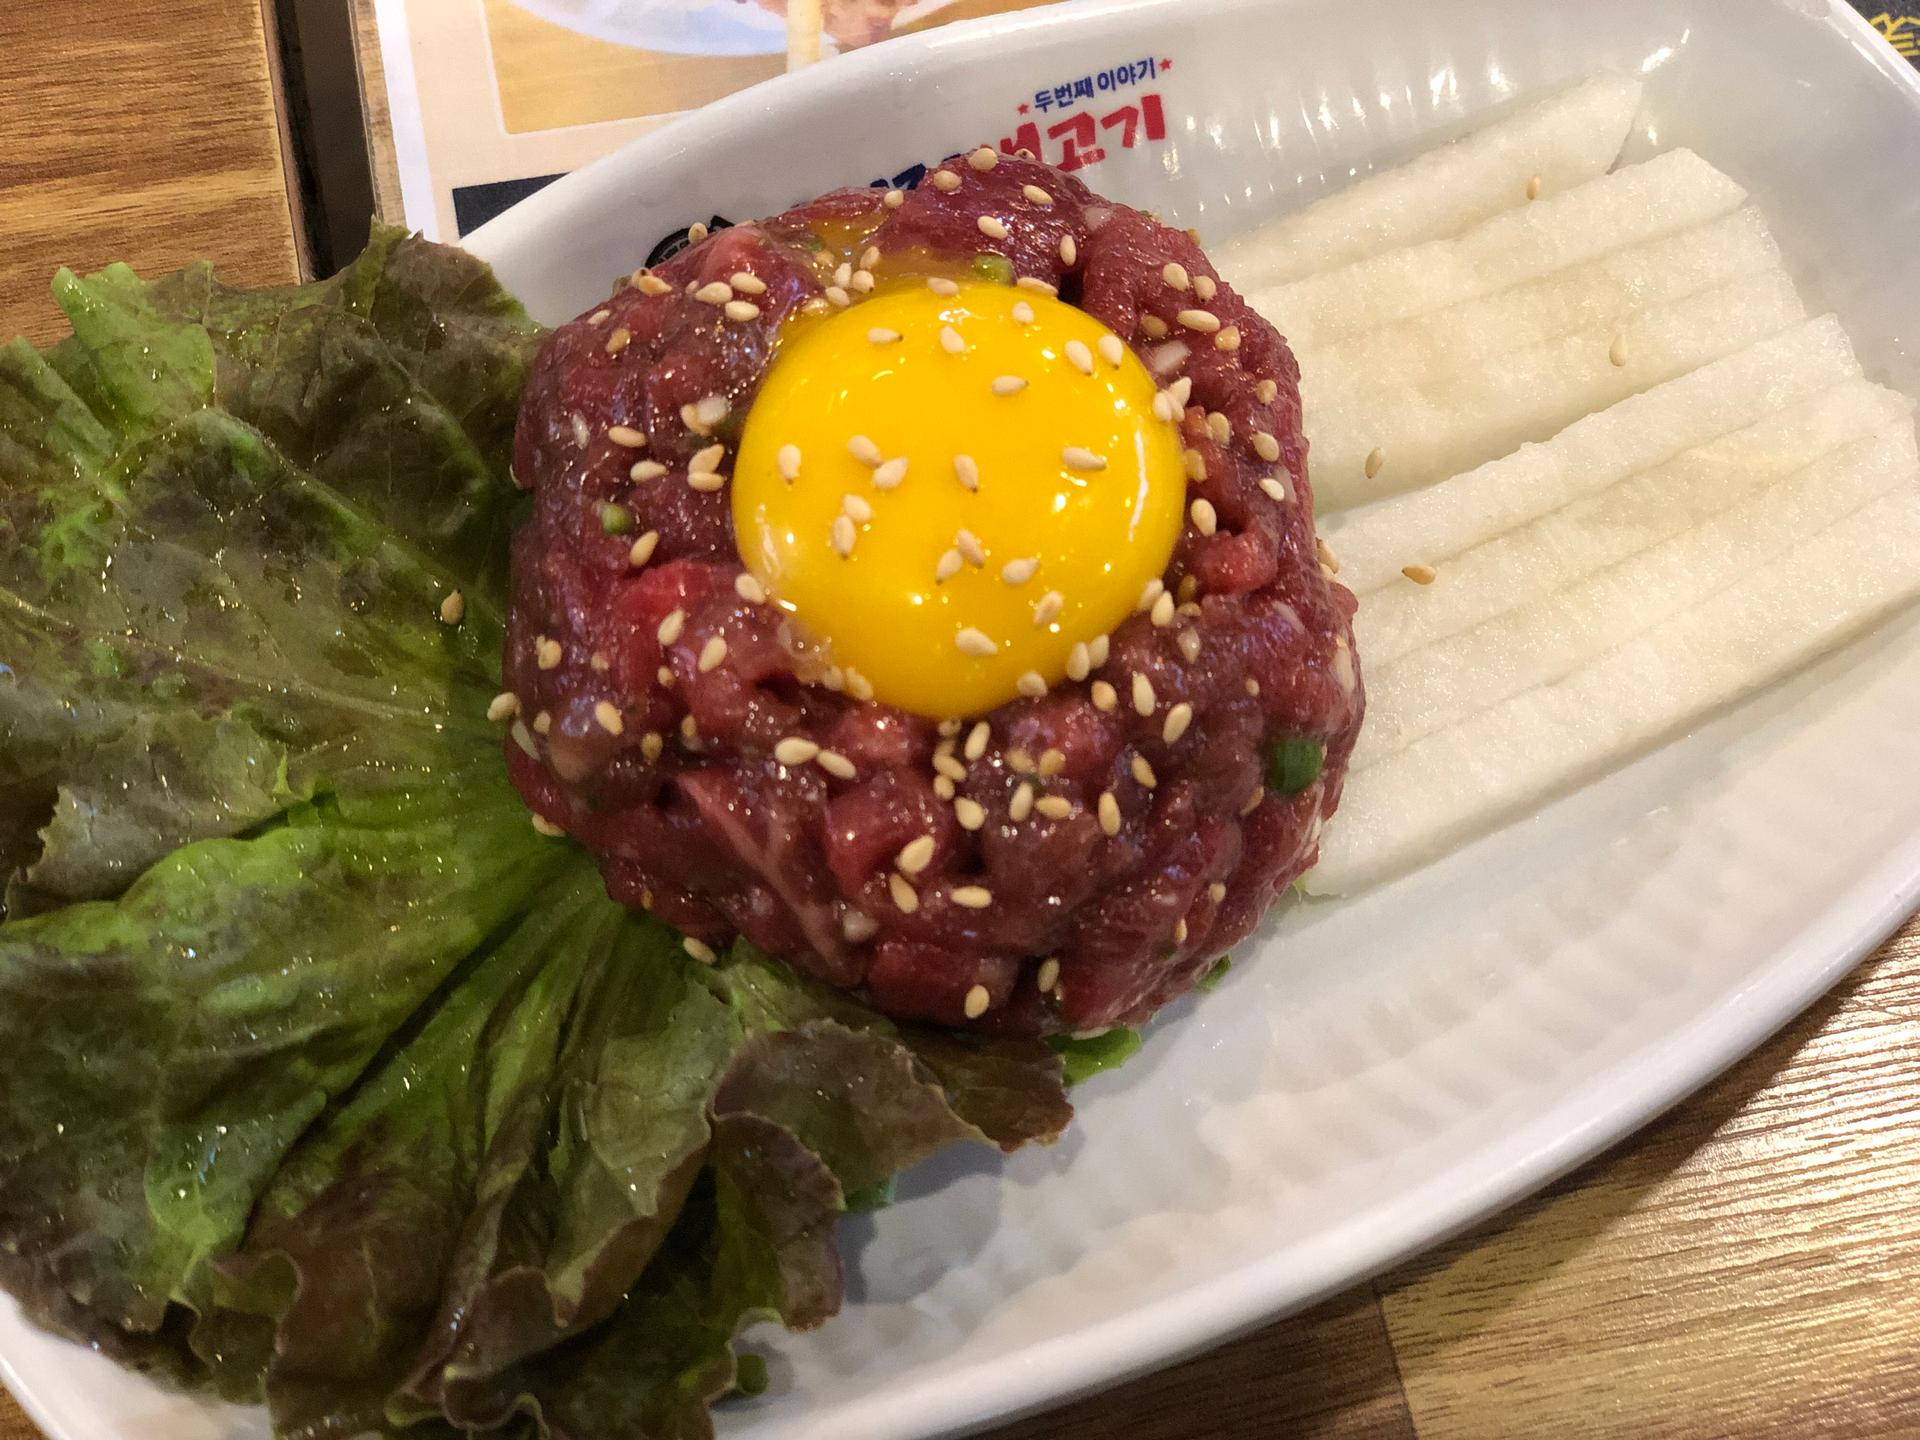 Plate of Korean steak tartare topped with egg yolk and fines herbes, served with tableware and produce at 엉터리생고기 홍대점.